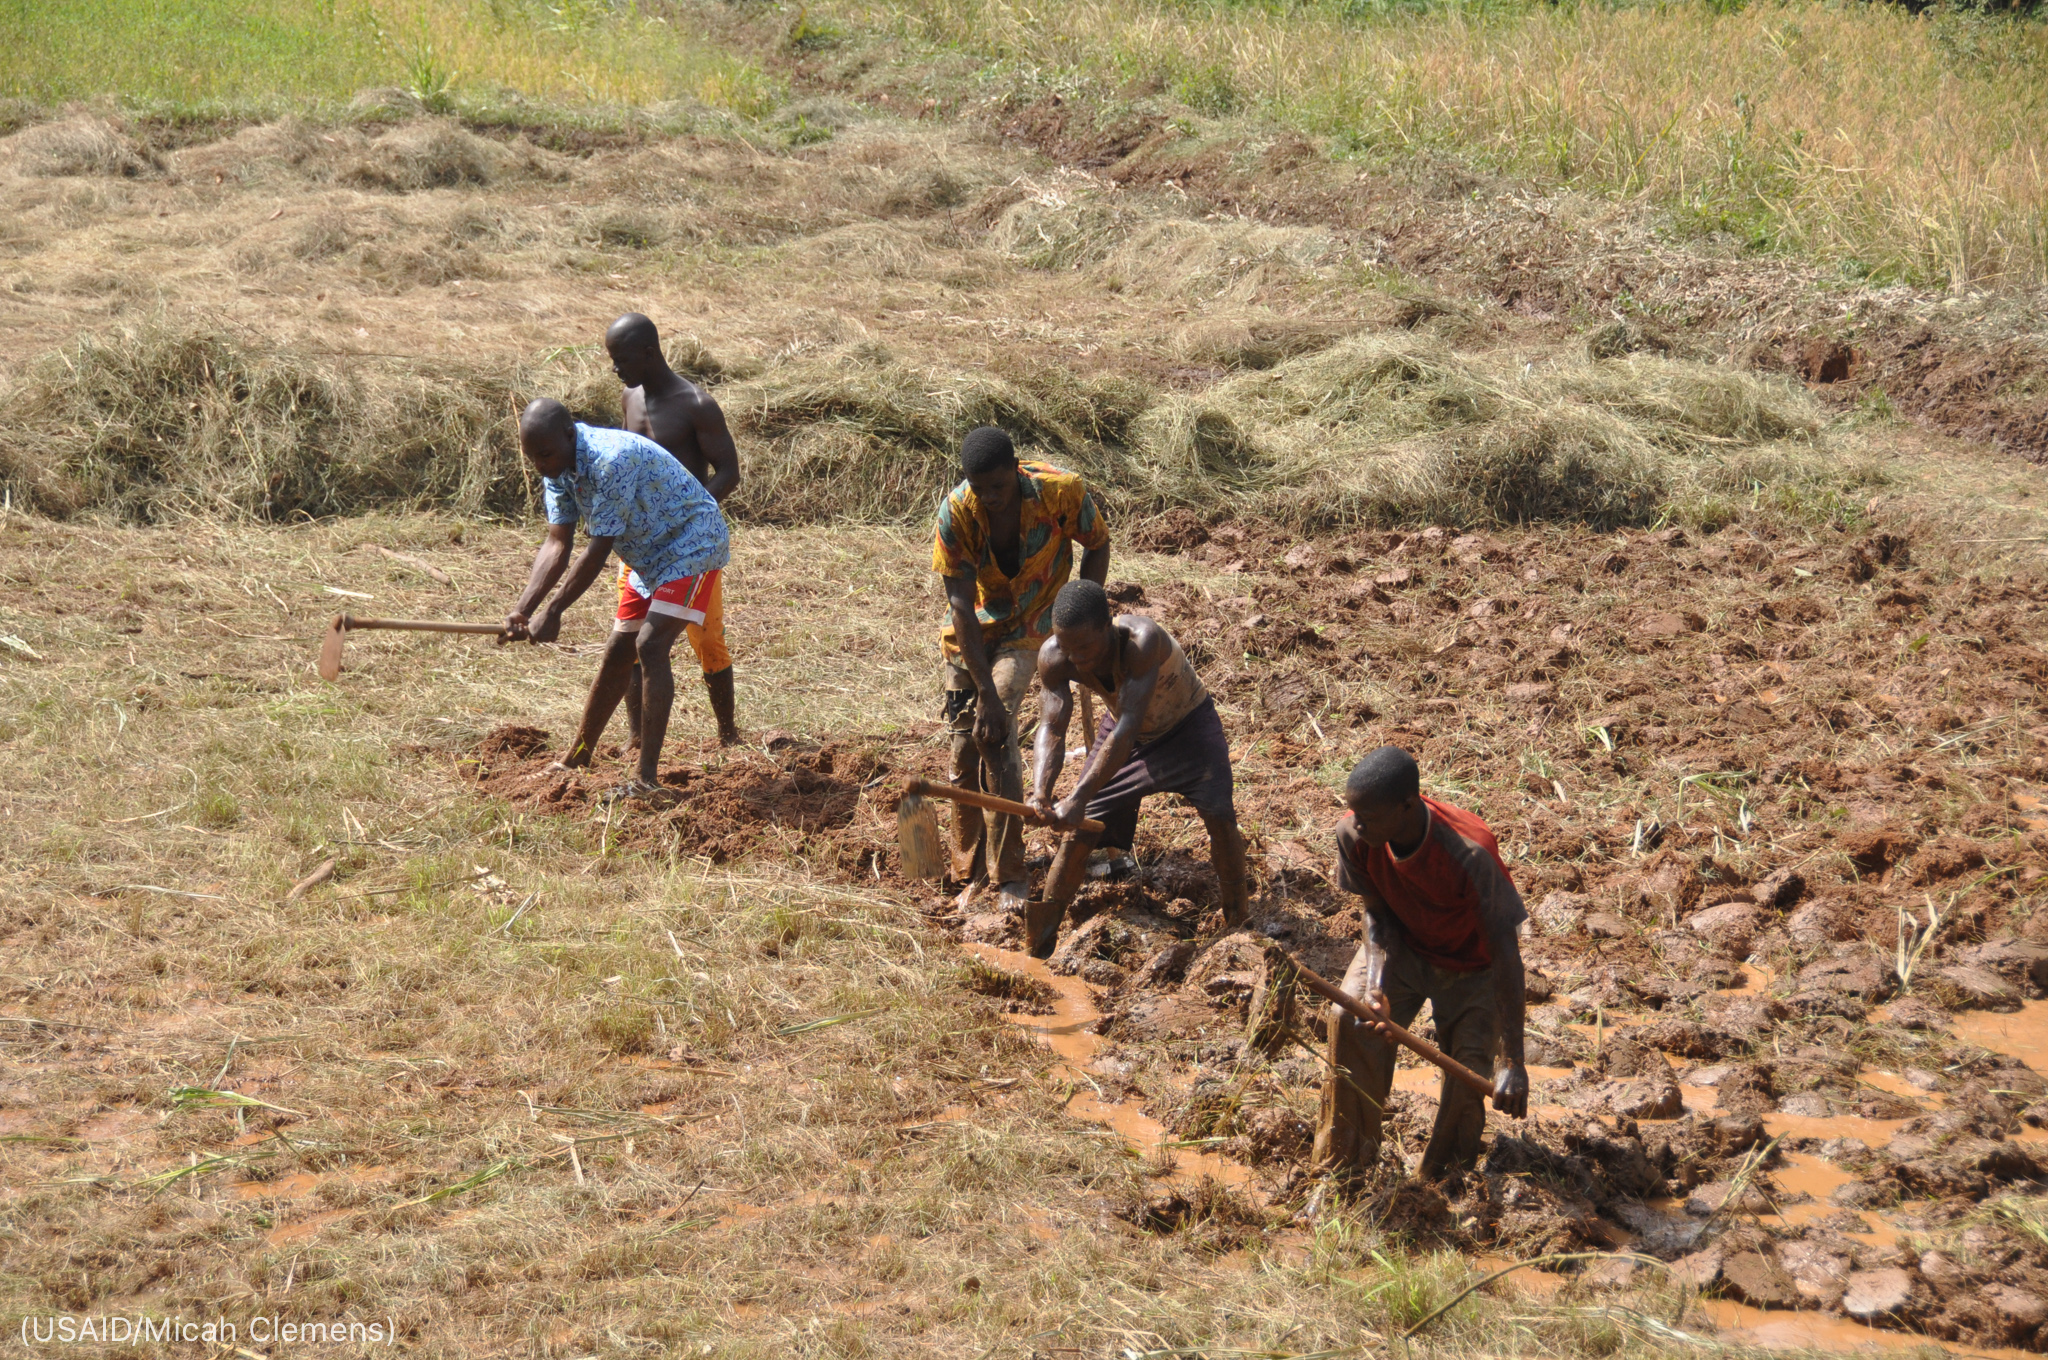 Five men breaking up farmland with hand tools (USAID/Micah Clemens)